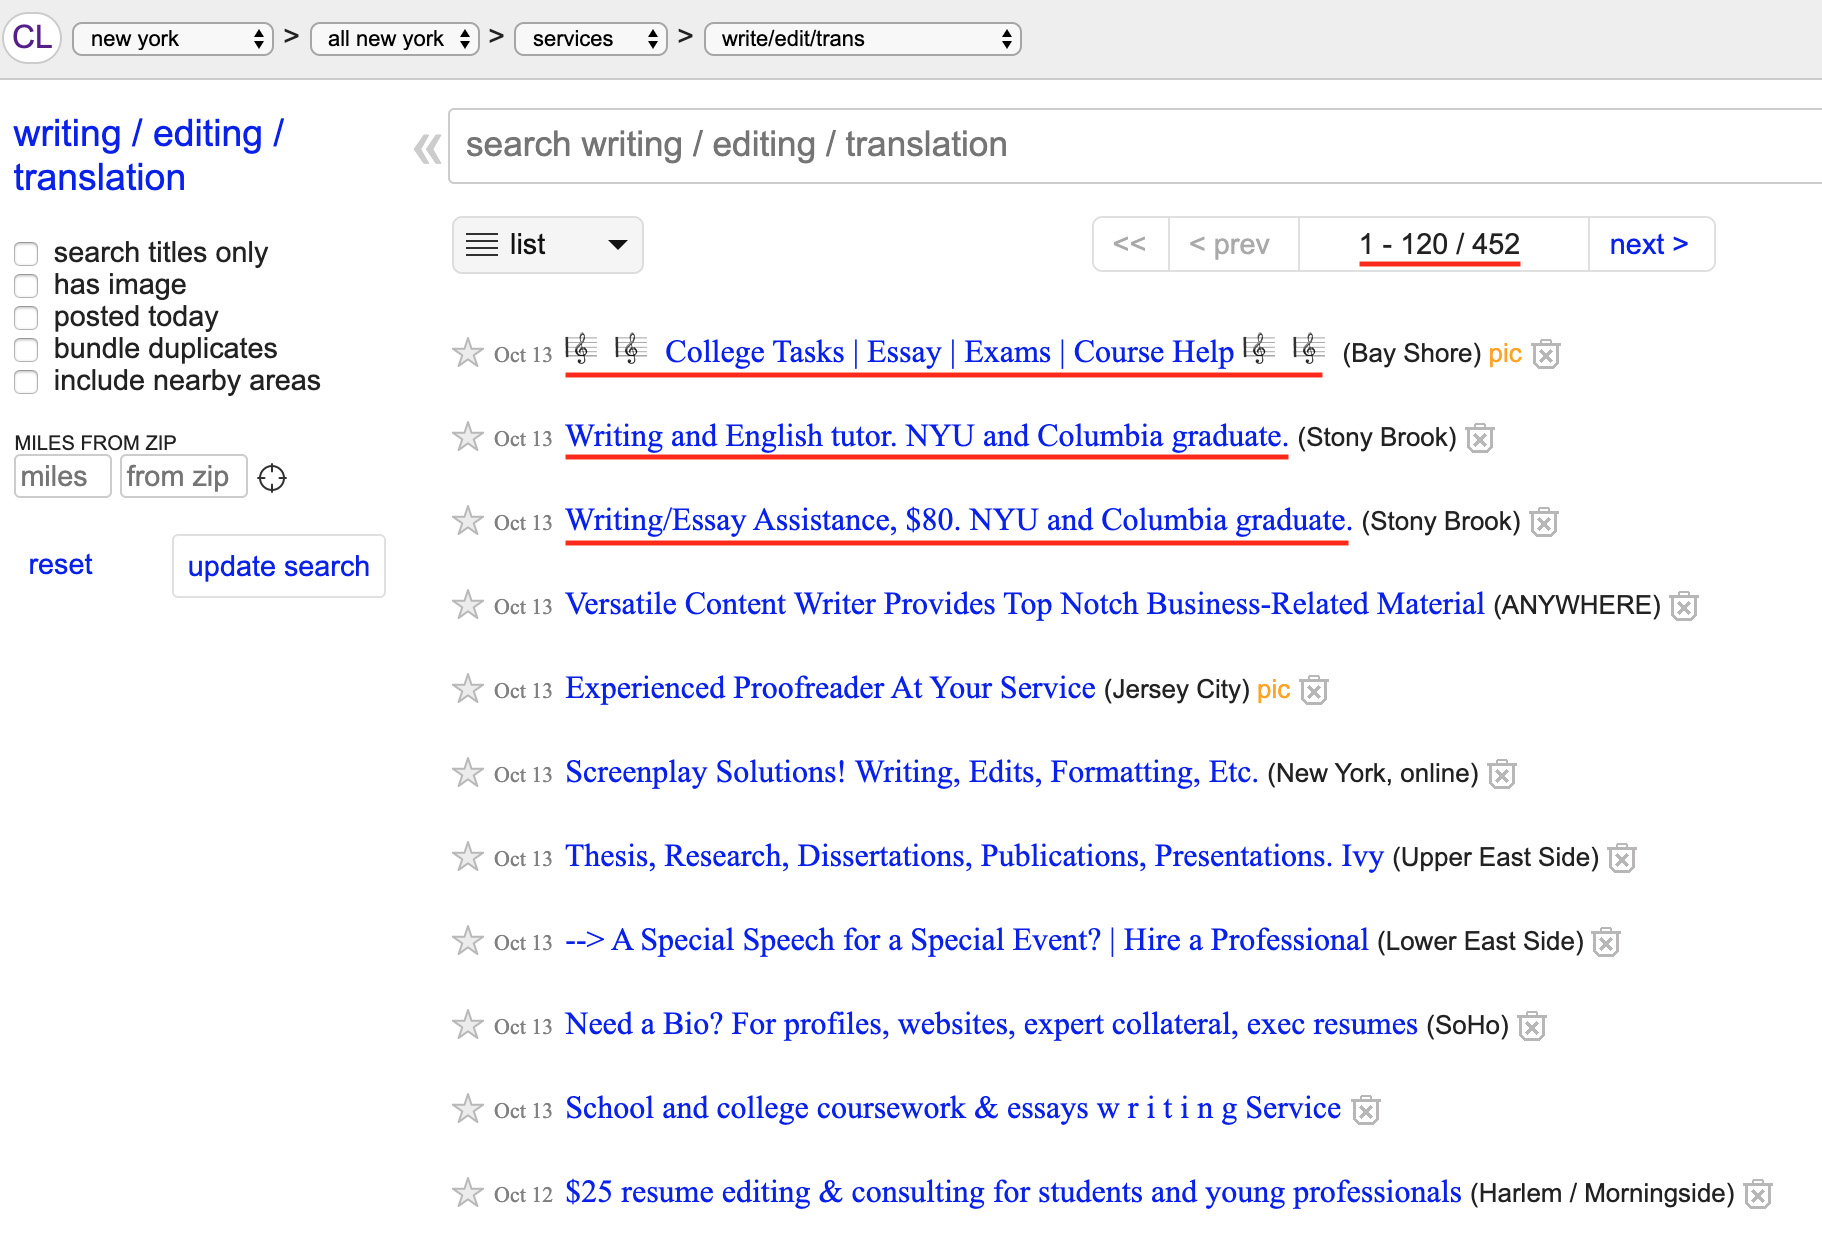 A screenshot from the Writing / Editing / Translation section of Craigslist, showing various offers and prices.